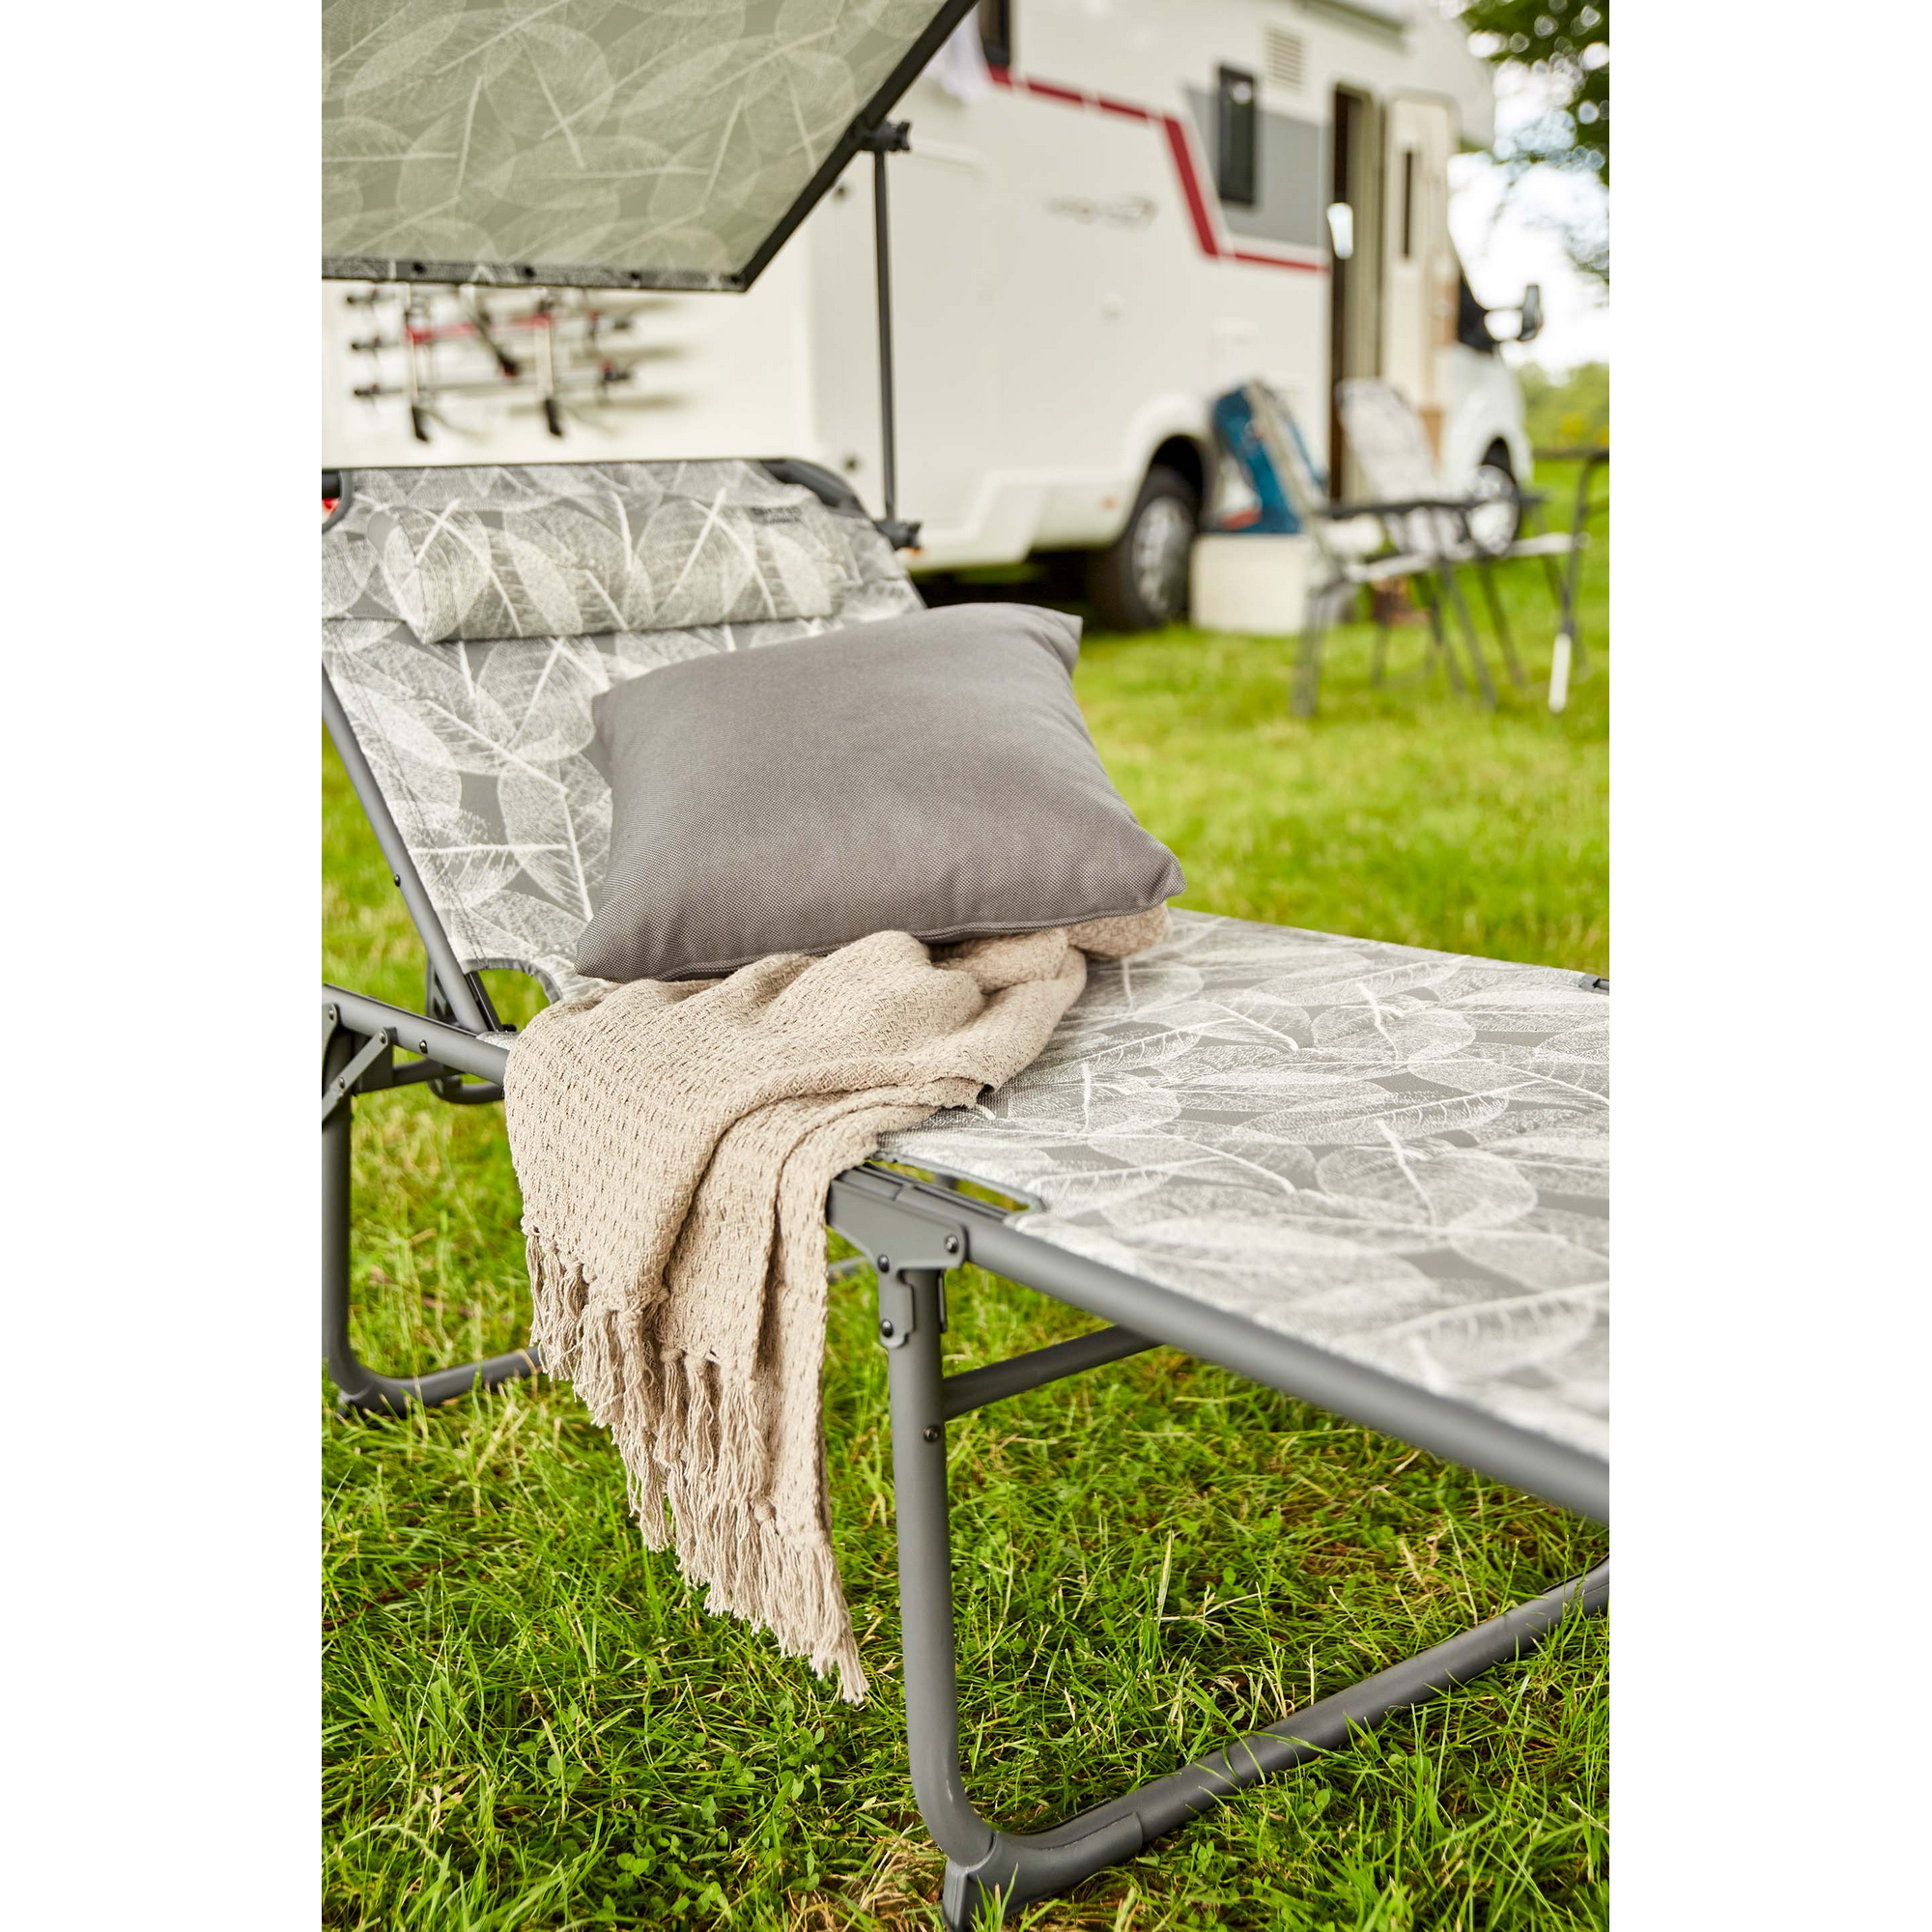 Camping-Sonnenliege 'Natura' grau 200 x 69 x 43 cm + product picture